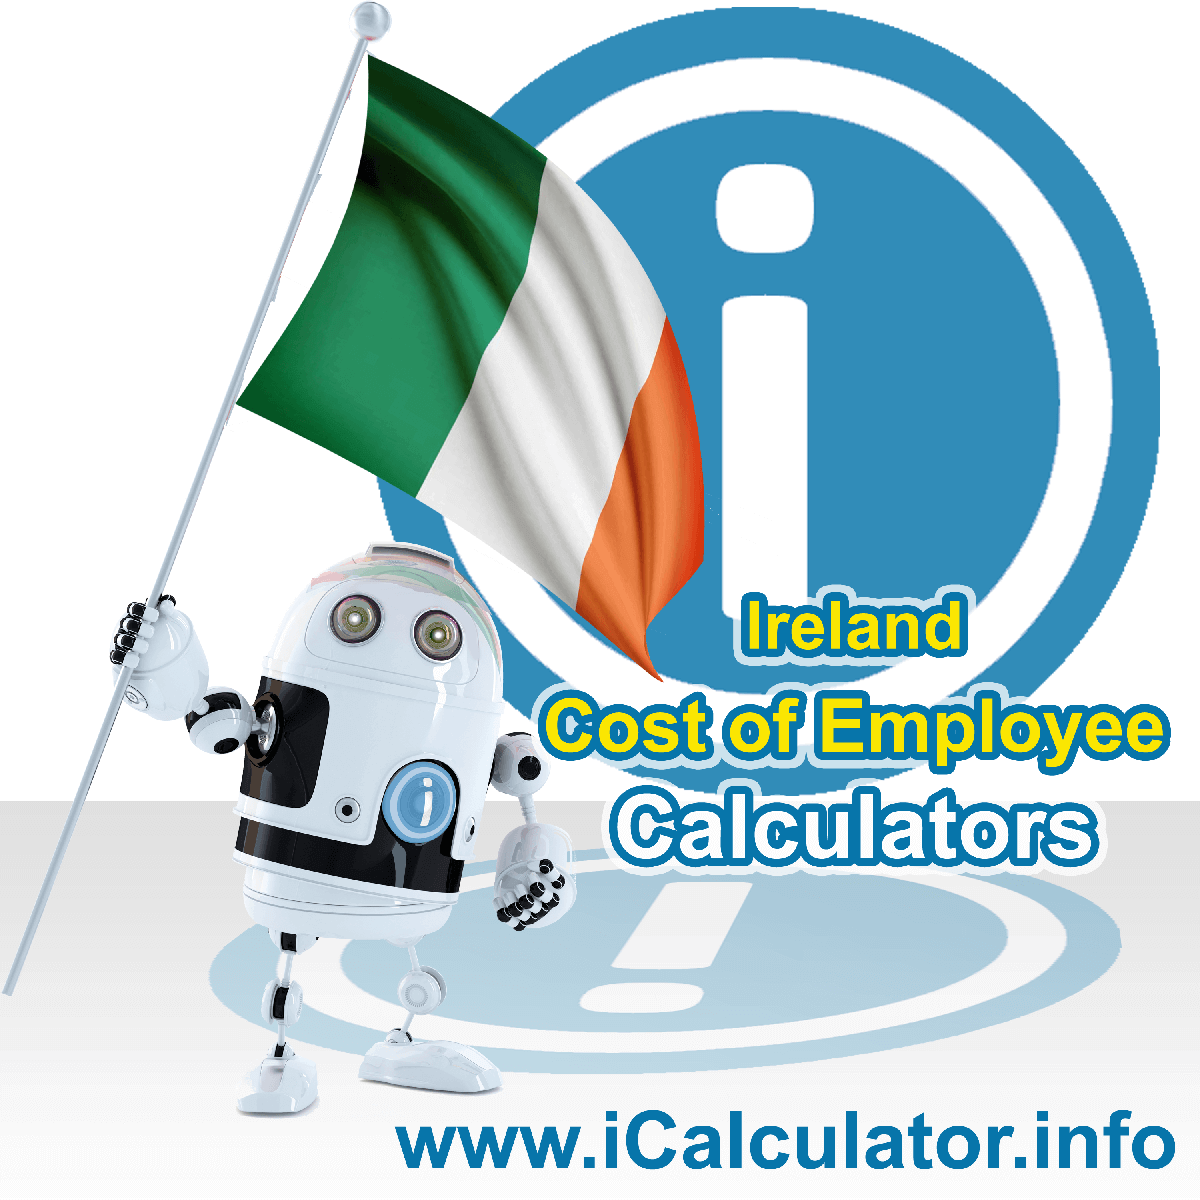 Ireland Payroll Calculator. This image shows a new employer in Ireland looking at payroll and human resource services in Ireland as they want to hire an employee in Ireland but are not sure of the employment costs. So, they make use of the Ireland payroll calculator to understand their employment cost in Ireland in 2023